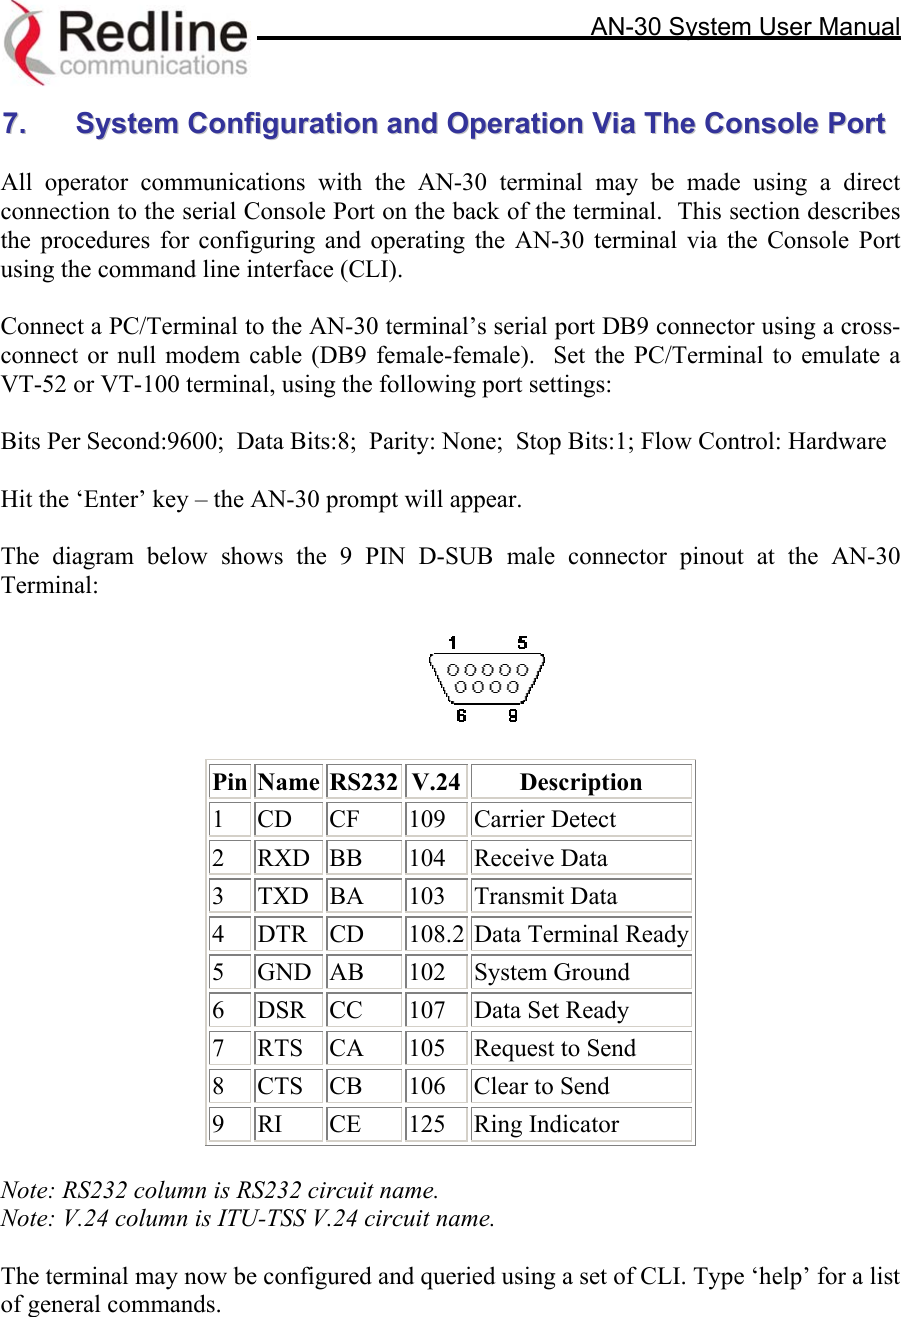     AN-30 System User Manual  77..  SSyysstteemm  CCoonnffiigguurraattiioonn  aanndd  OOppeerraattiioonn  VViiaa  TThhee  CCoonnssoollee  PPoorrtt   All operator communications with the AN-30 terminal may be made using a direct connection to the serial Console Port on the back of the terminal.  This section describes the procedures for configuring and operating the AN-30 terminal via the Console Port using the command line interface (CLI).    Connect a PC/Terminal to the AN-30 terminal’s serial port DB9 connector using a cross-connect or null modem cable (DB9 female-female).  Set the PC/Terminal to emulate a VT-52 or VT-100 terminal, using the following port settings:    Bits Per Second:9600;  Data Bits:8;  Parity: None;  Stop Bits:1; Flow Control: Hardware  Hit the ‘Enter’ key – the AN-30 prompt will appear.  The diagram below shows the 9 PIN D-SUB male connector pinout at the AN-30 Terminal:  Pin Name RS232 V.24 Description 1 CD  CF  109 Carrier Detect 2 RXD BB  104 Receive Data 3 TXD BA  103 Transmit Data 4  DTR  CD  108.2 Data Terminal Ready5 GND AB  102 System Ground 6  DSR  CC  107  Data Set Ready 7  RTS  CA  105  Request to Send 8  CTS  CB  106  Clear to Send 9 RI  CE  125 Ring Indicator  Note: RS232 column is RS232 circuit name. Note: V.24 column is ITU-TSS V.24 circuit name.  The terminal may now be configured and queried using a set of CLI. Type ‘help’ for a list of general commands.    